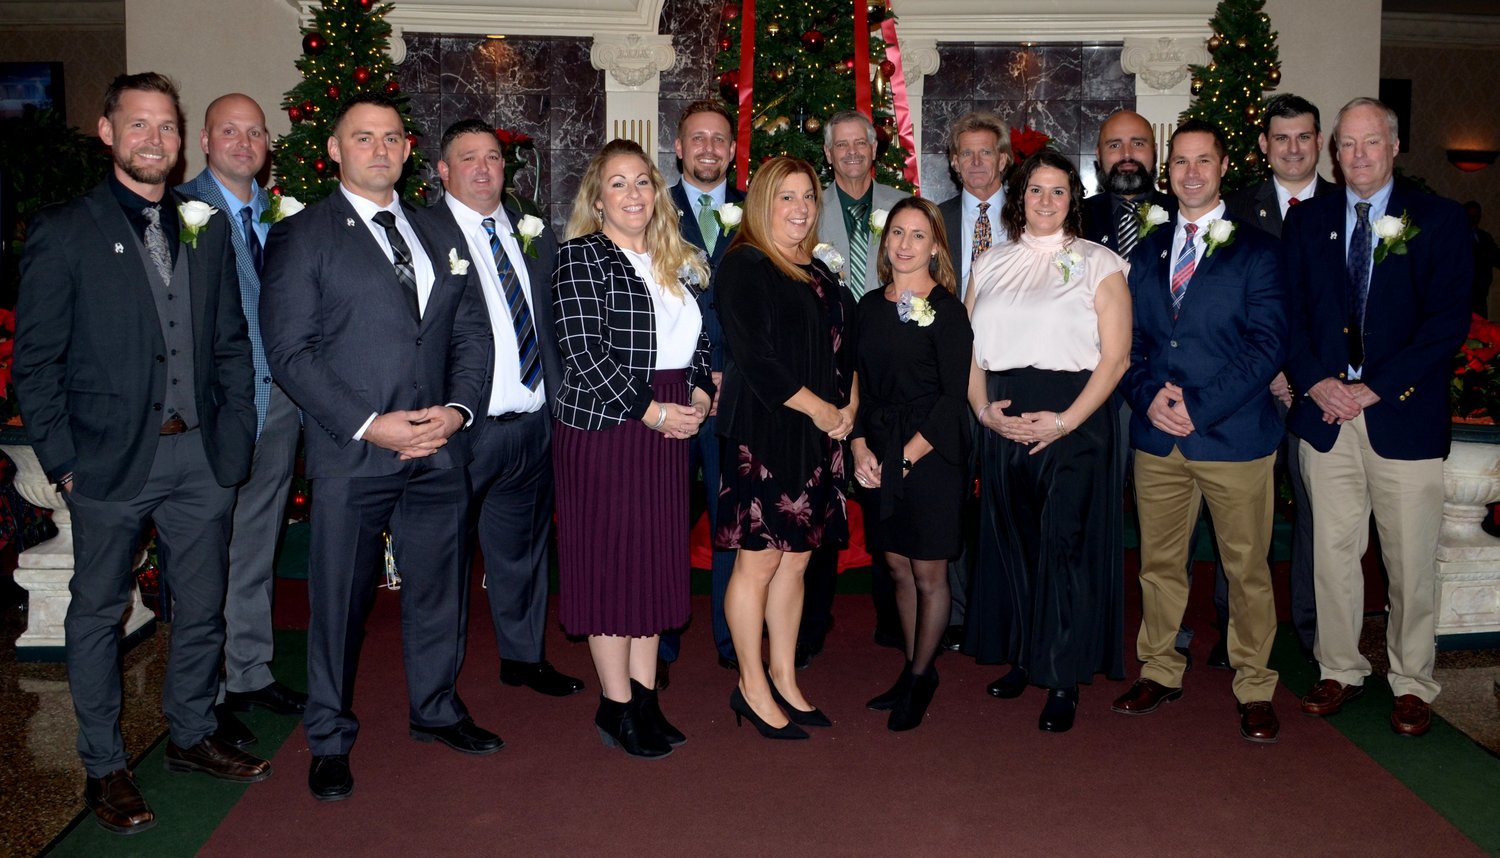 Newest members of the Bristol Athletic Hall of Fame include (front row, left to right) Lenny Estrella Jr., Phillip Wagoner, Kendra (Lanzire) Klein, Kerri (Ferreira) Giarrusso, Kristen (Oliver) King, Nichole O’Connell, Paul Castigliego Jr., and Dennis Dobbyn; and (back row) Jayson Gaynor, Kenneth V. Nerone, Marc Federico, Michael Topazio, John Ratier, Brian Machado, and Andrew B. Abilheira. Not present was Michael Marolla.